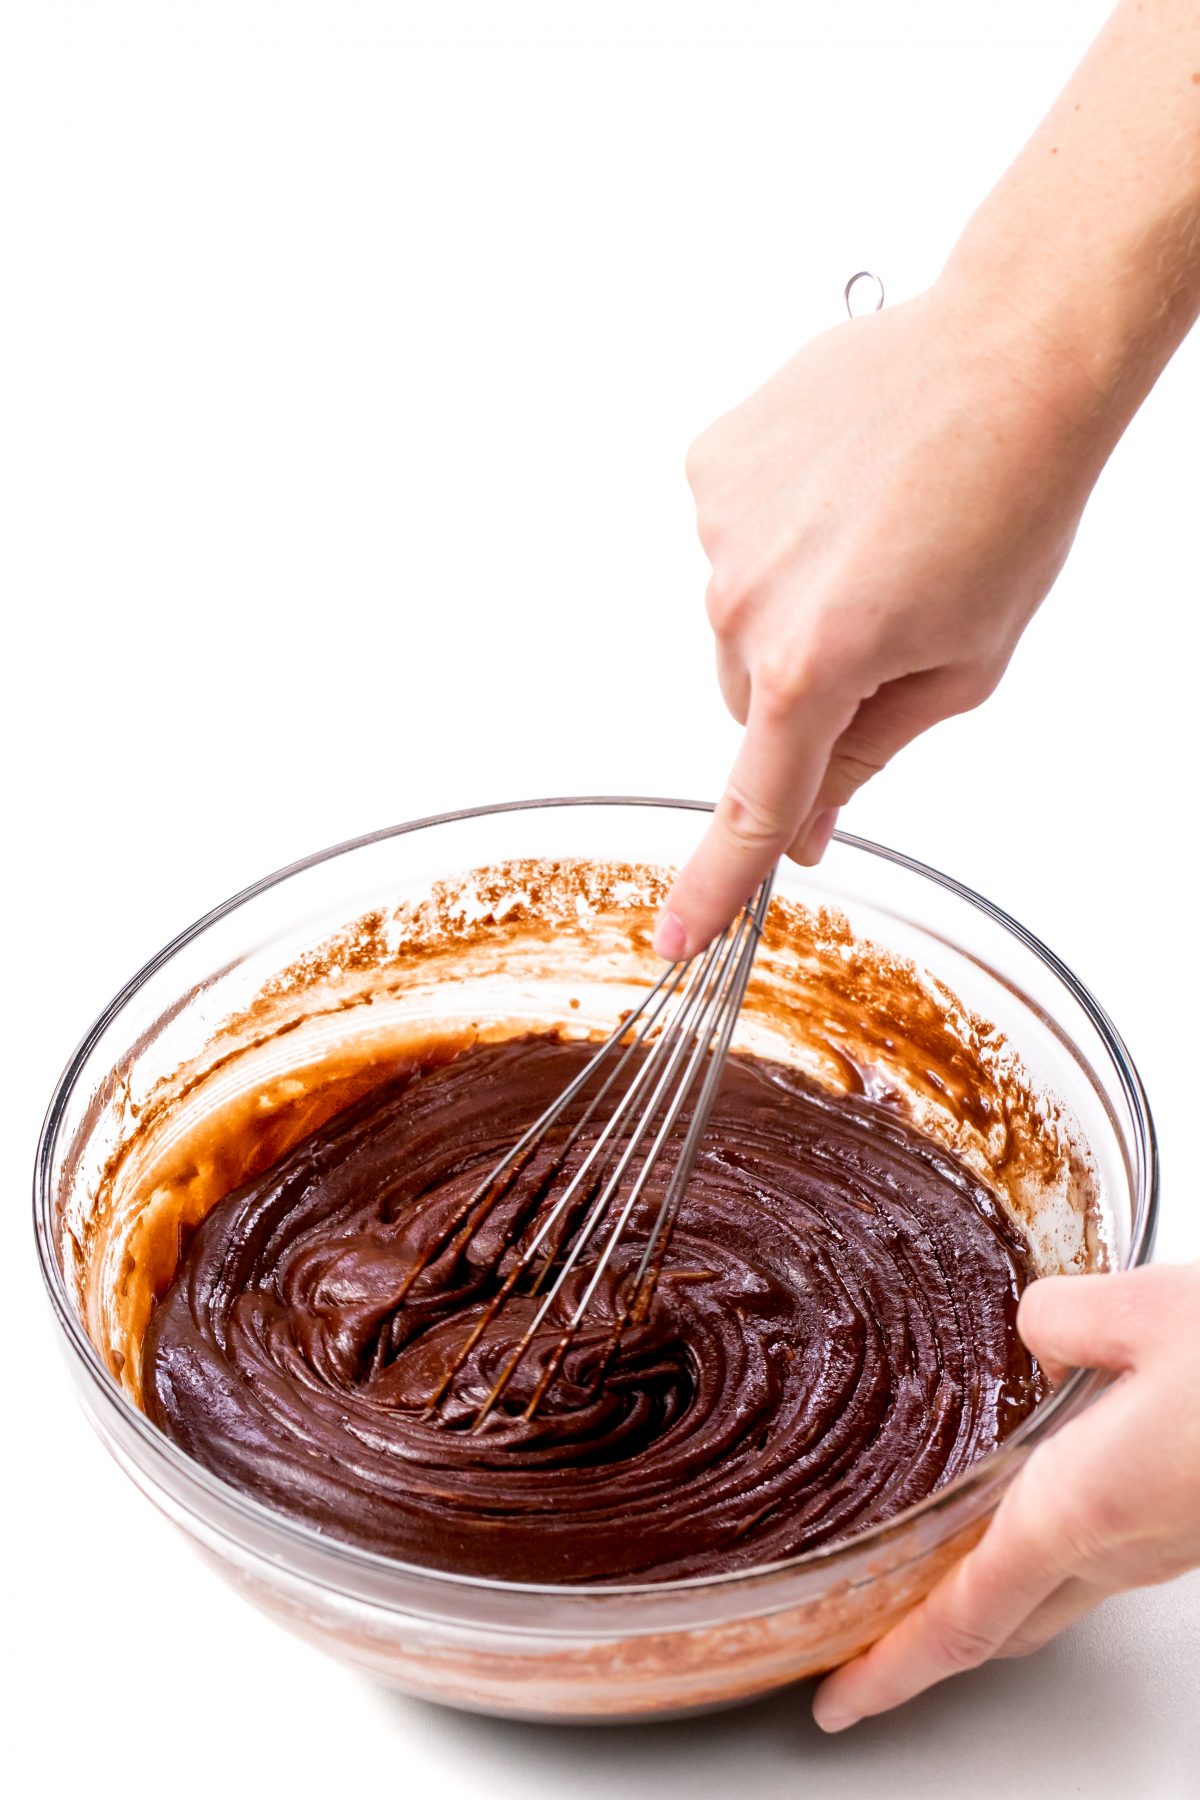 Stir cocoa and flour mixtures together